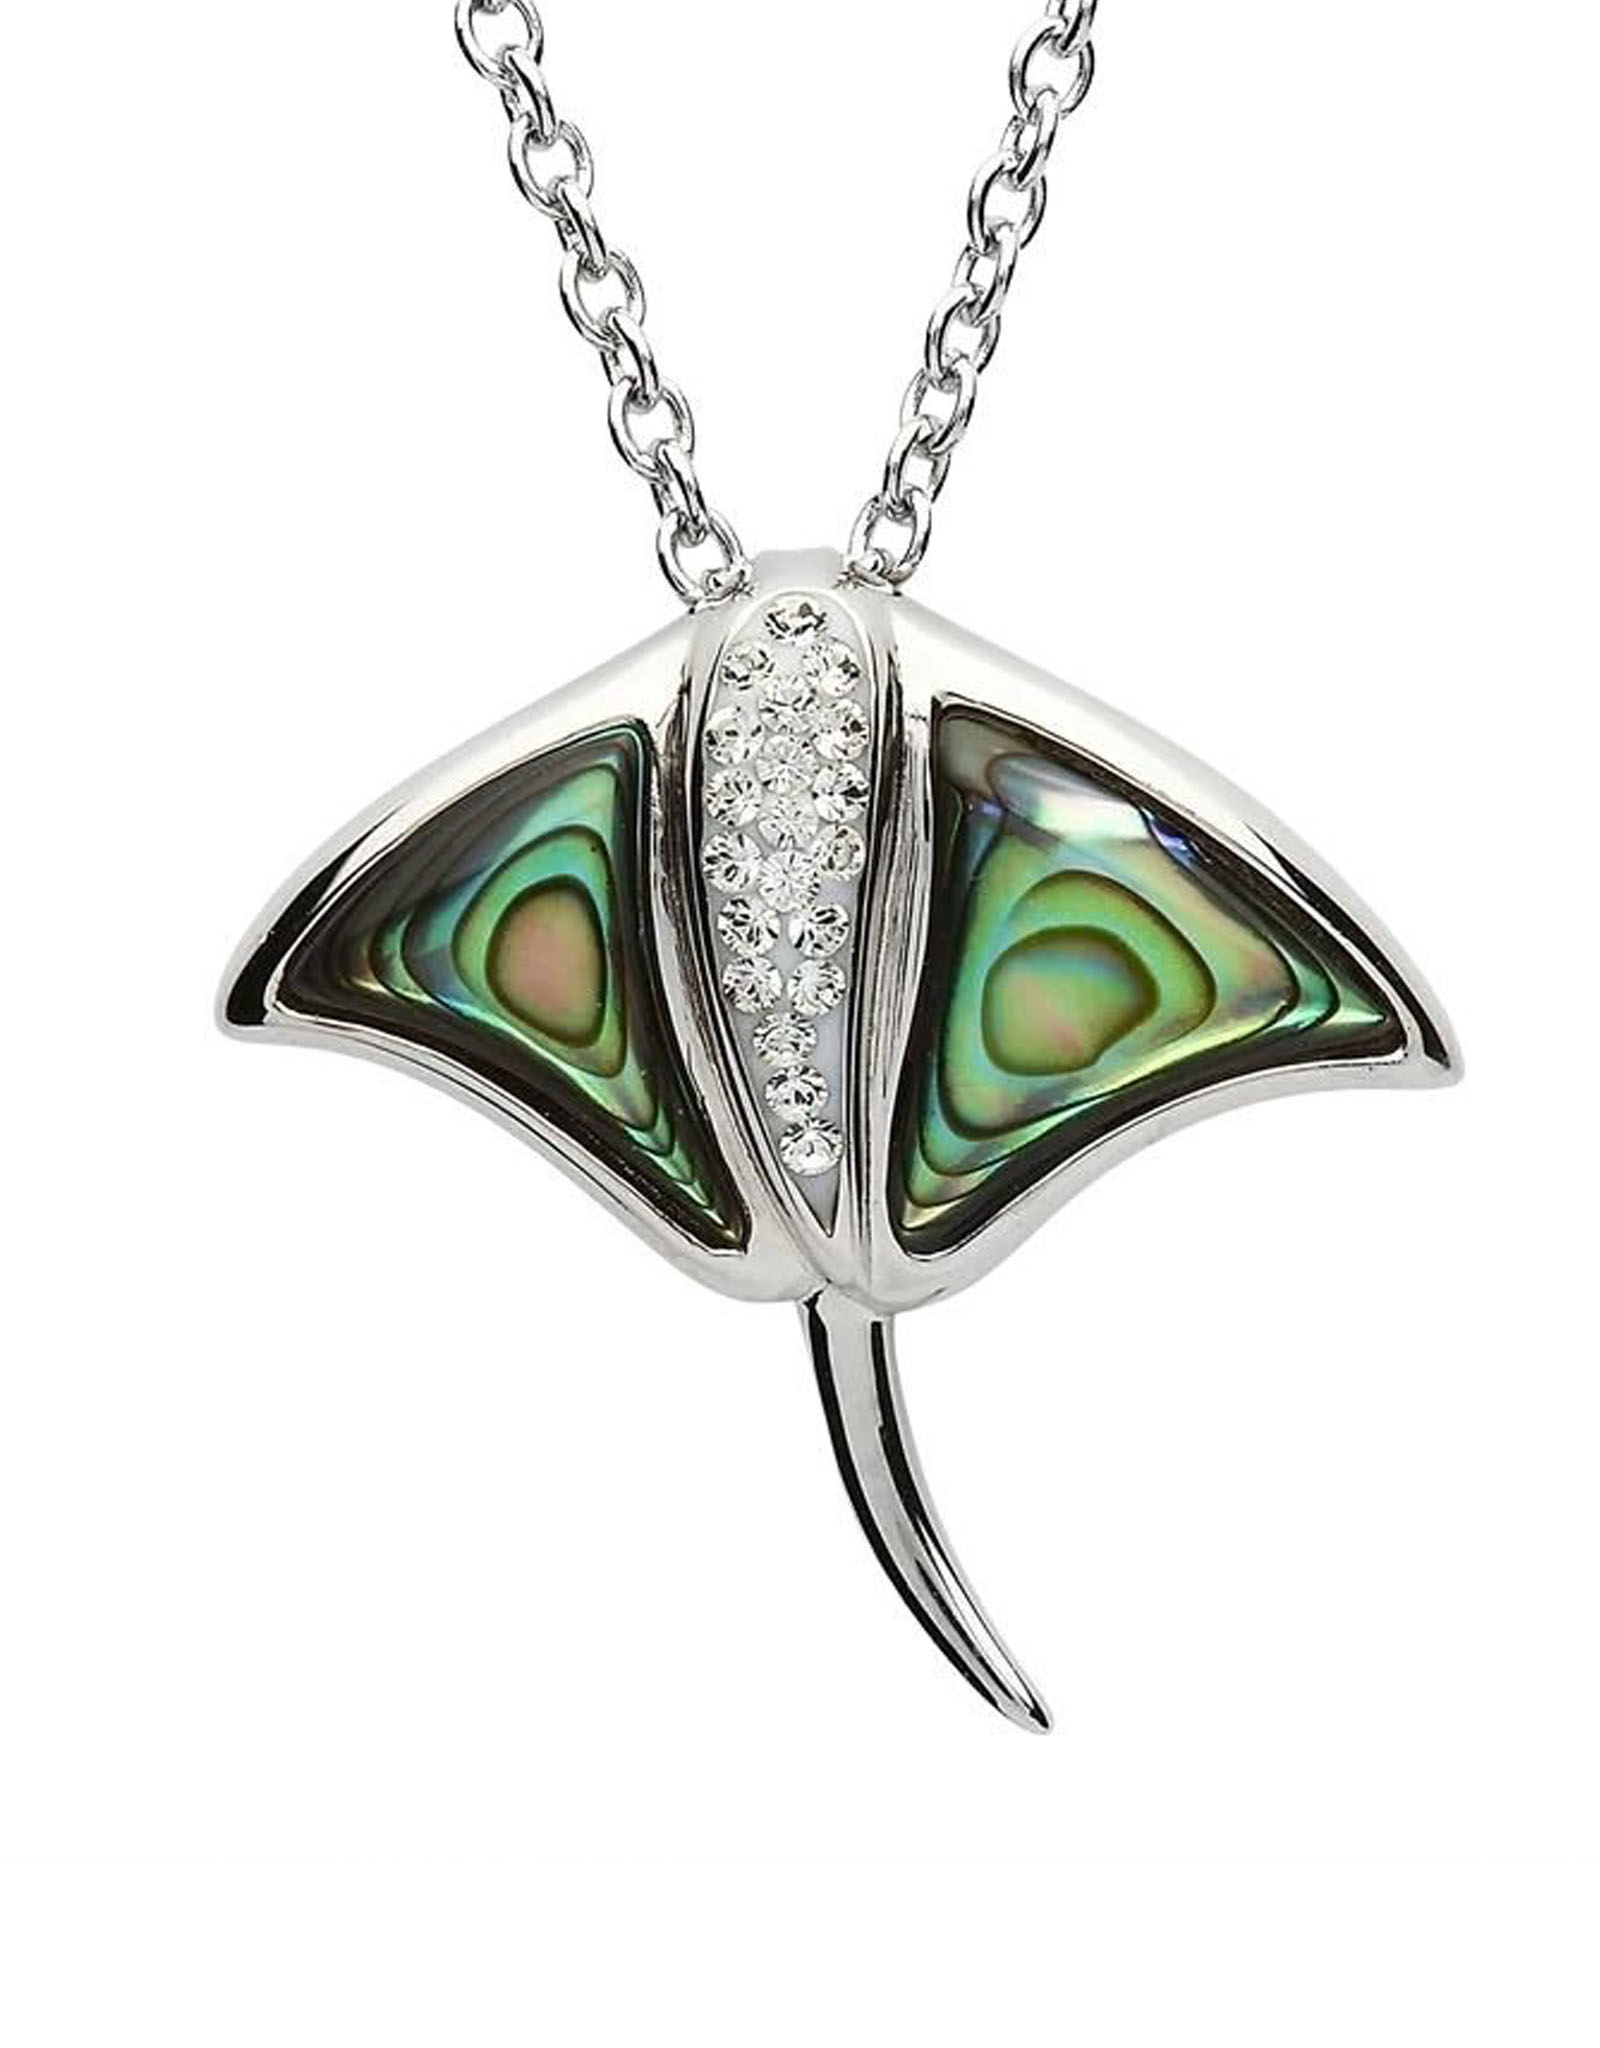 PENDANTS & NECKLACES OCEAN STERLING STING RAY w. ABALONE SHELL & CRYSTALS